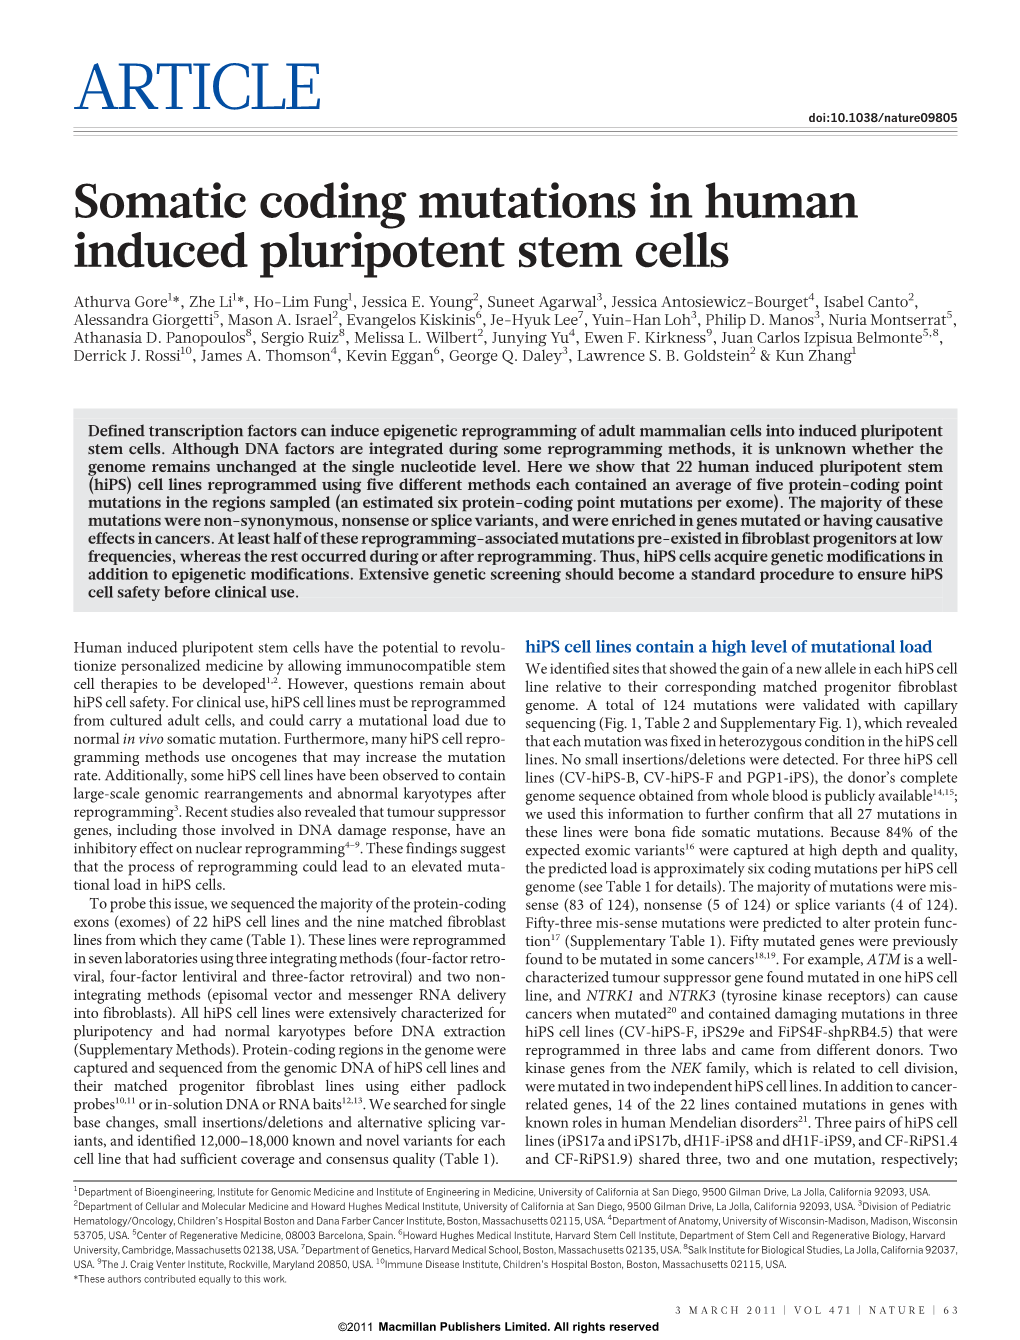 Somatic Coding Mutations in Human Induced Pluripotent Stem Cells